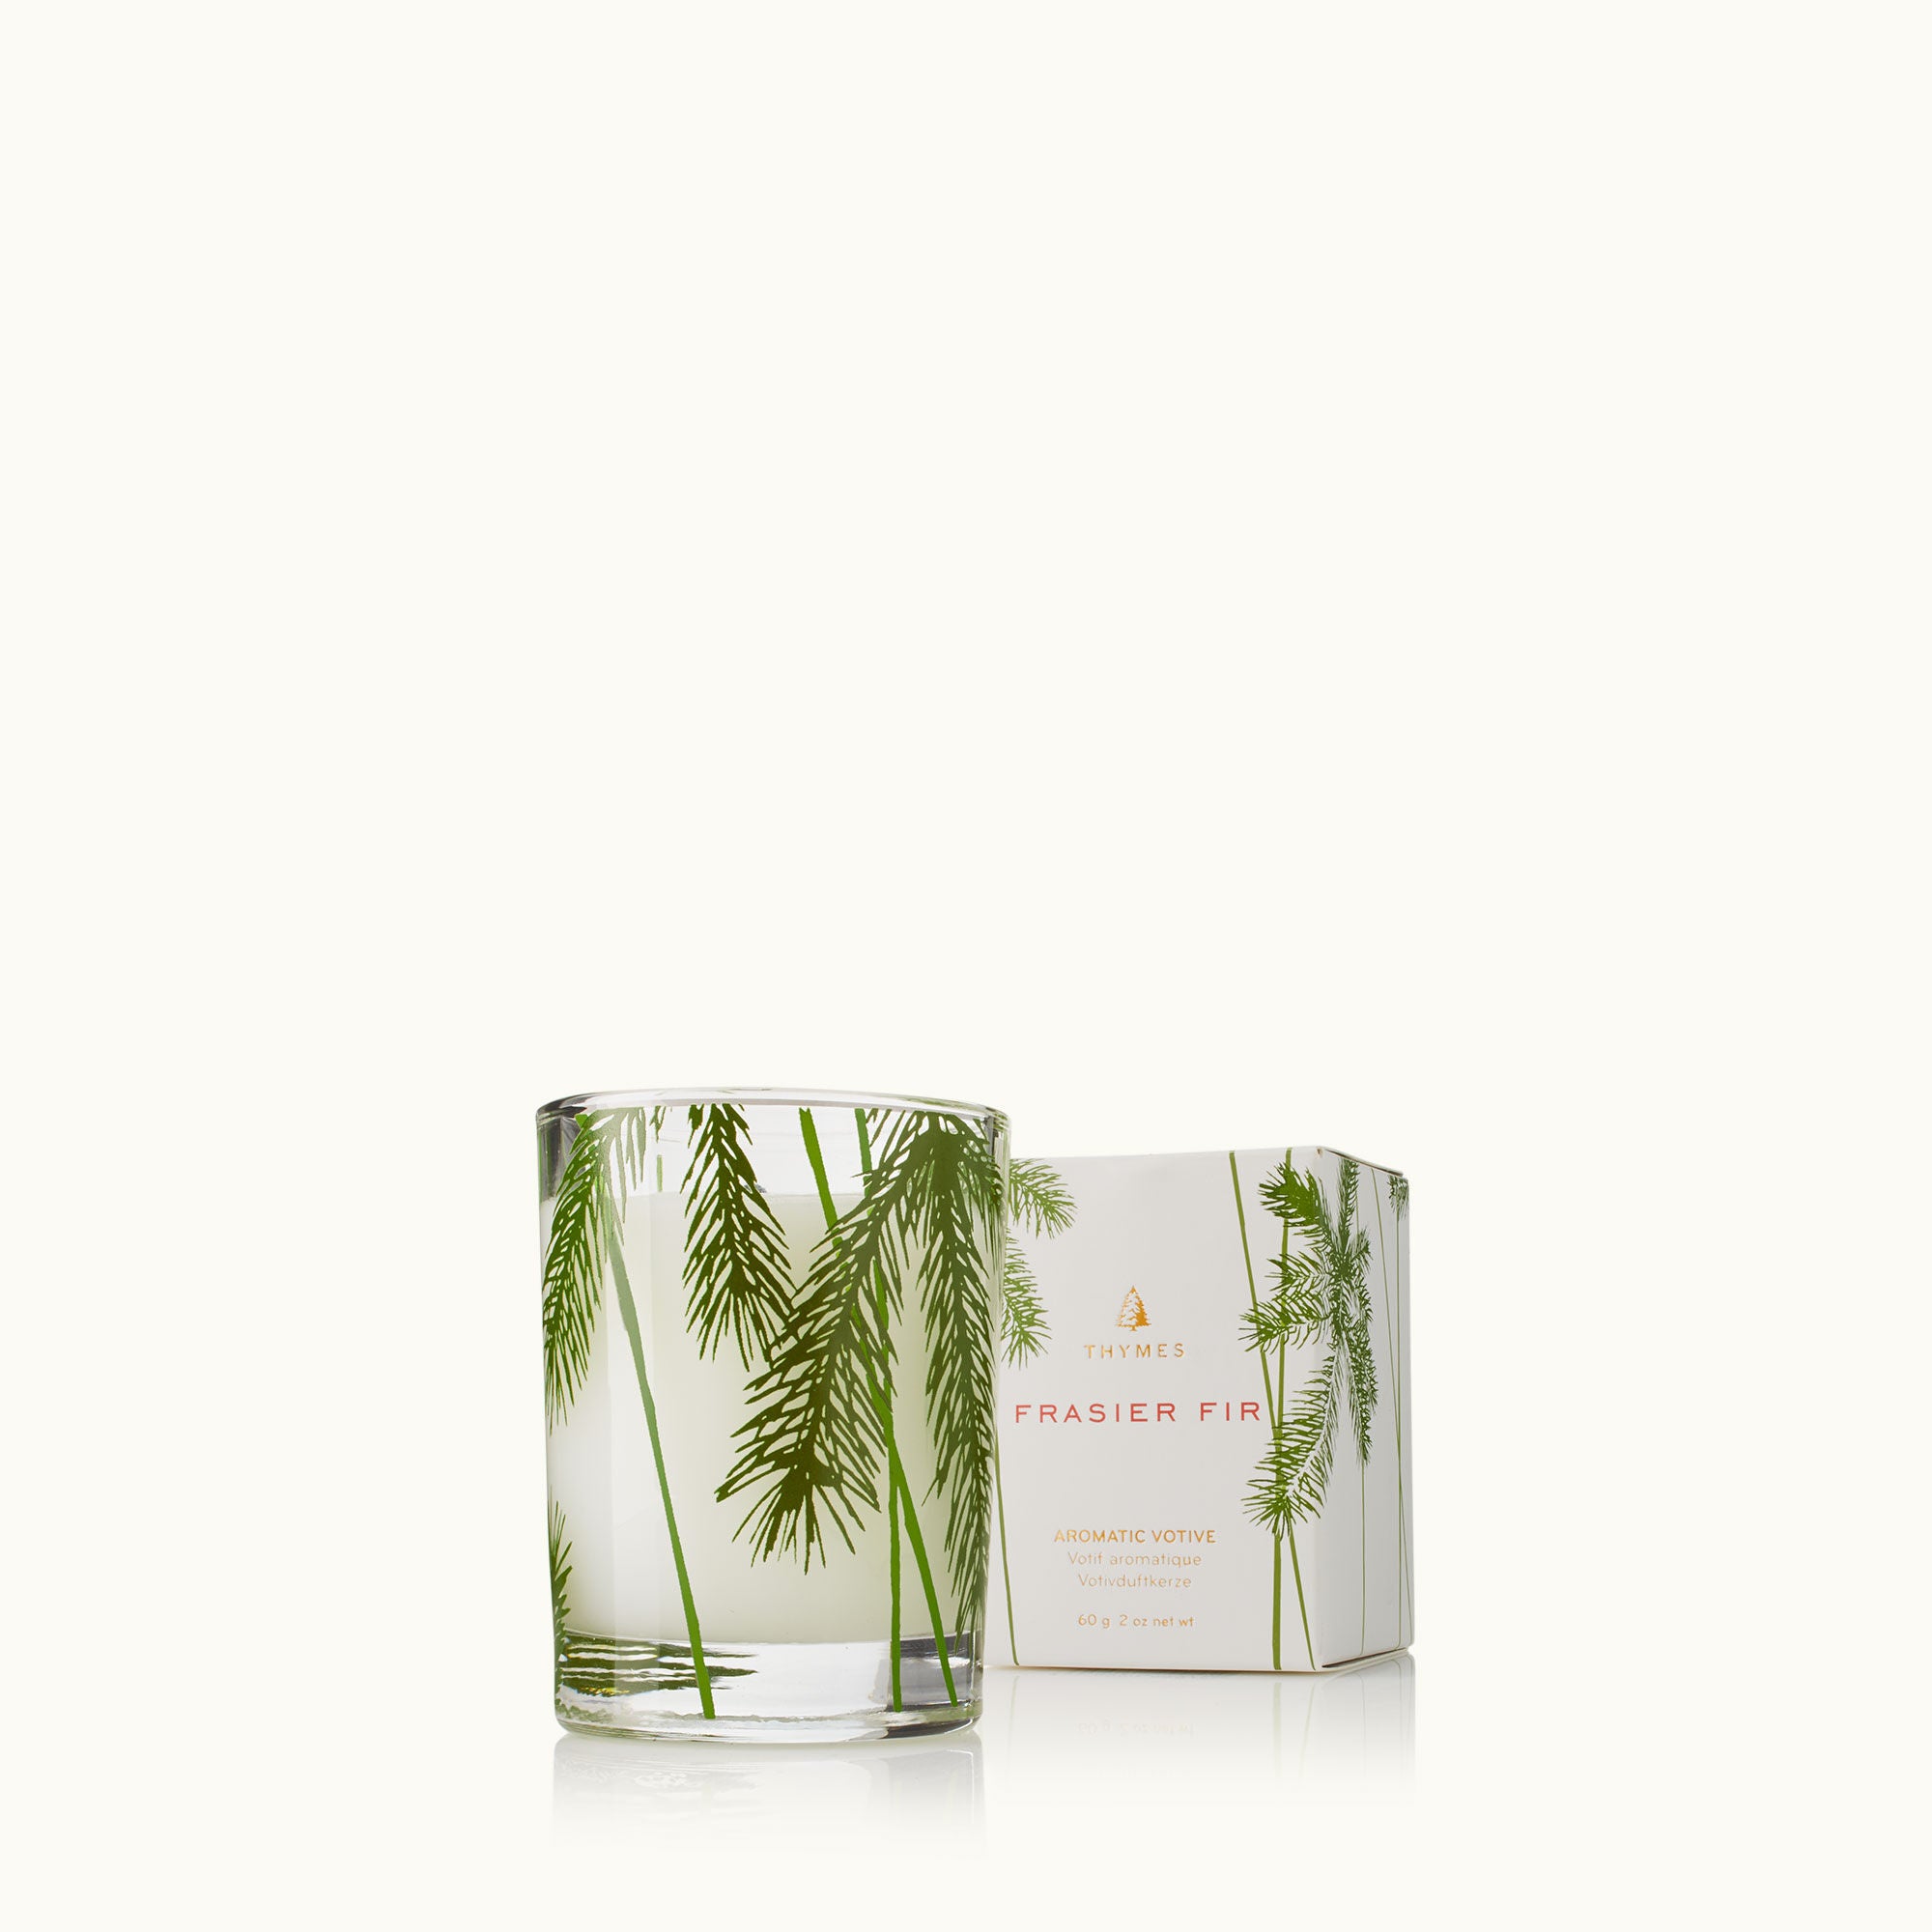 Thymes Frasier Fir Votive Candle - Petit Pine Needle